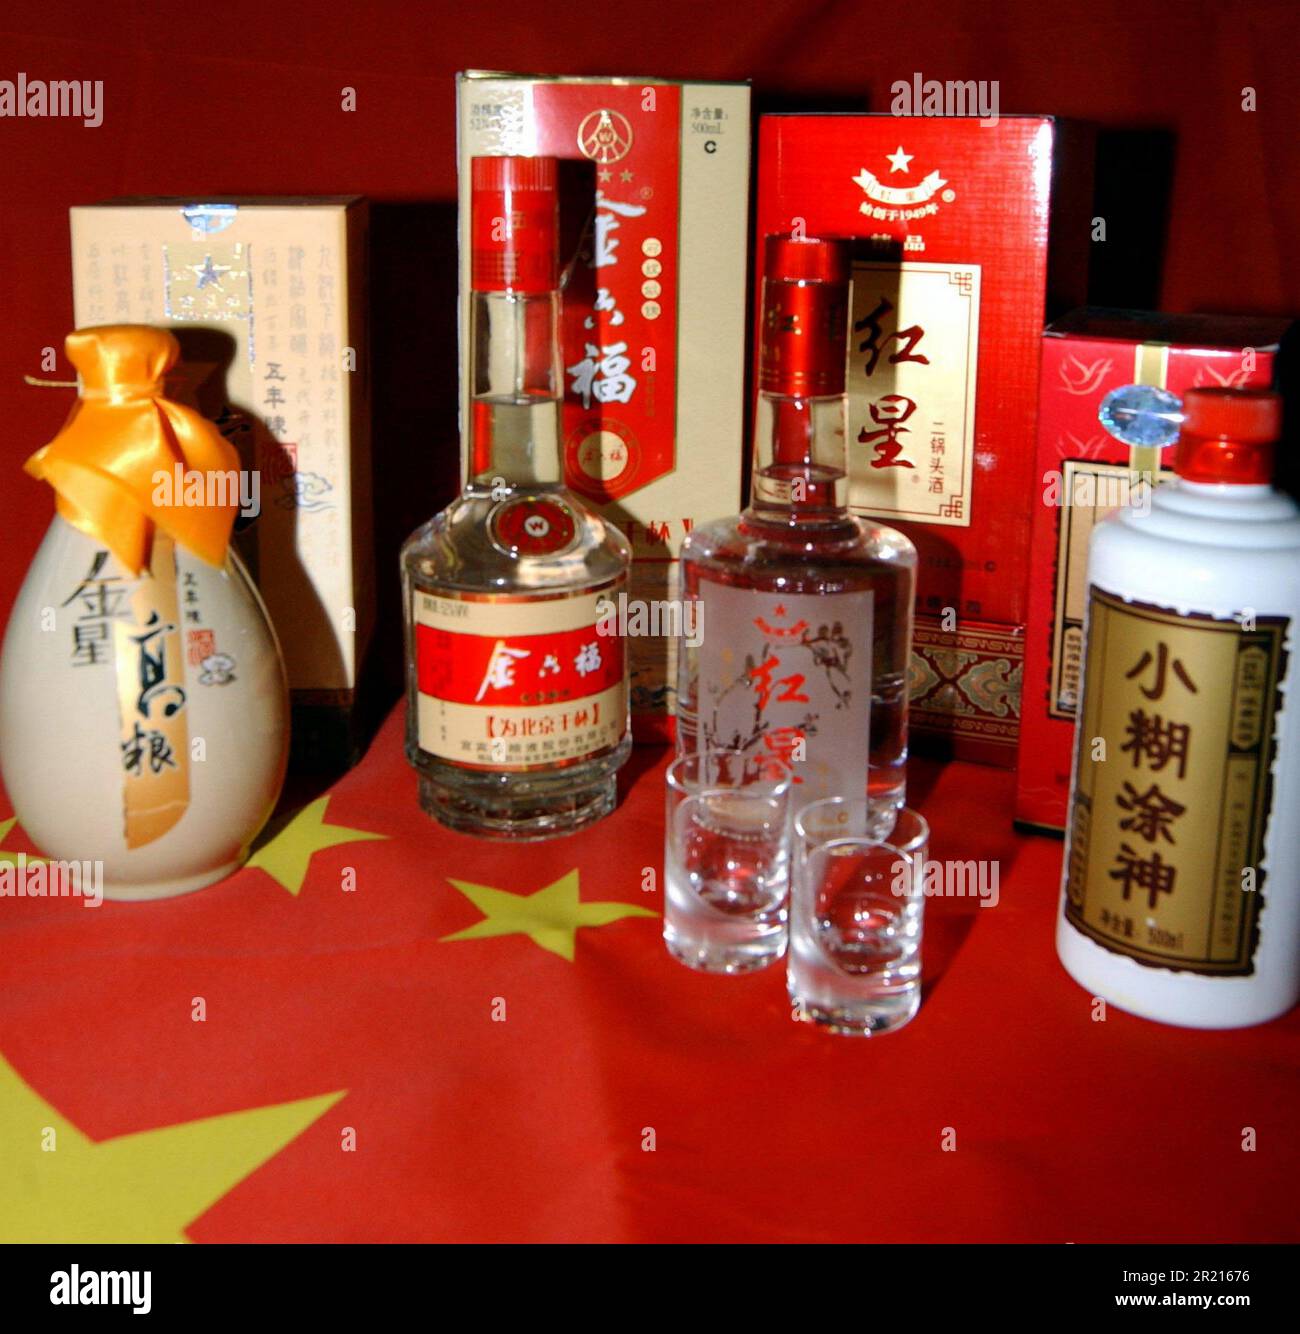 Chinese 'Baijiu' - a potent Chinese distilled alcoholic beverage. The name  baijiu literally means "white liquor," "white alcohol" or "white spirits."  Chinese often mistakenly translate baijiu as "wine" or "white wine", but